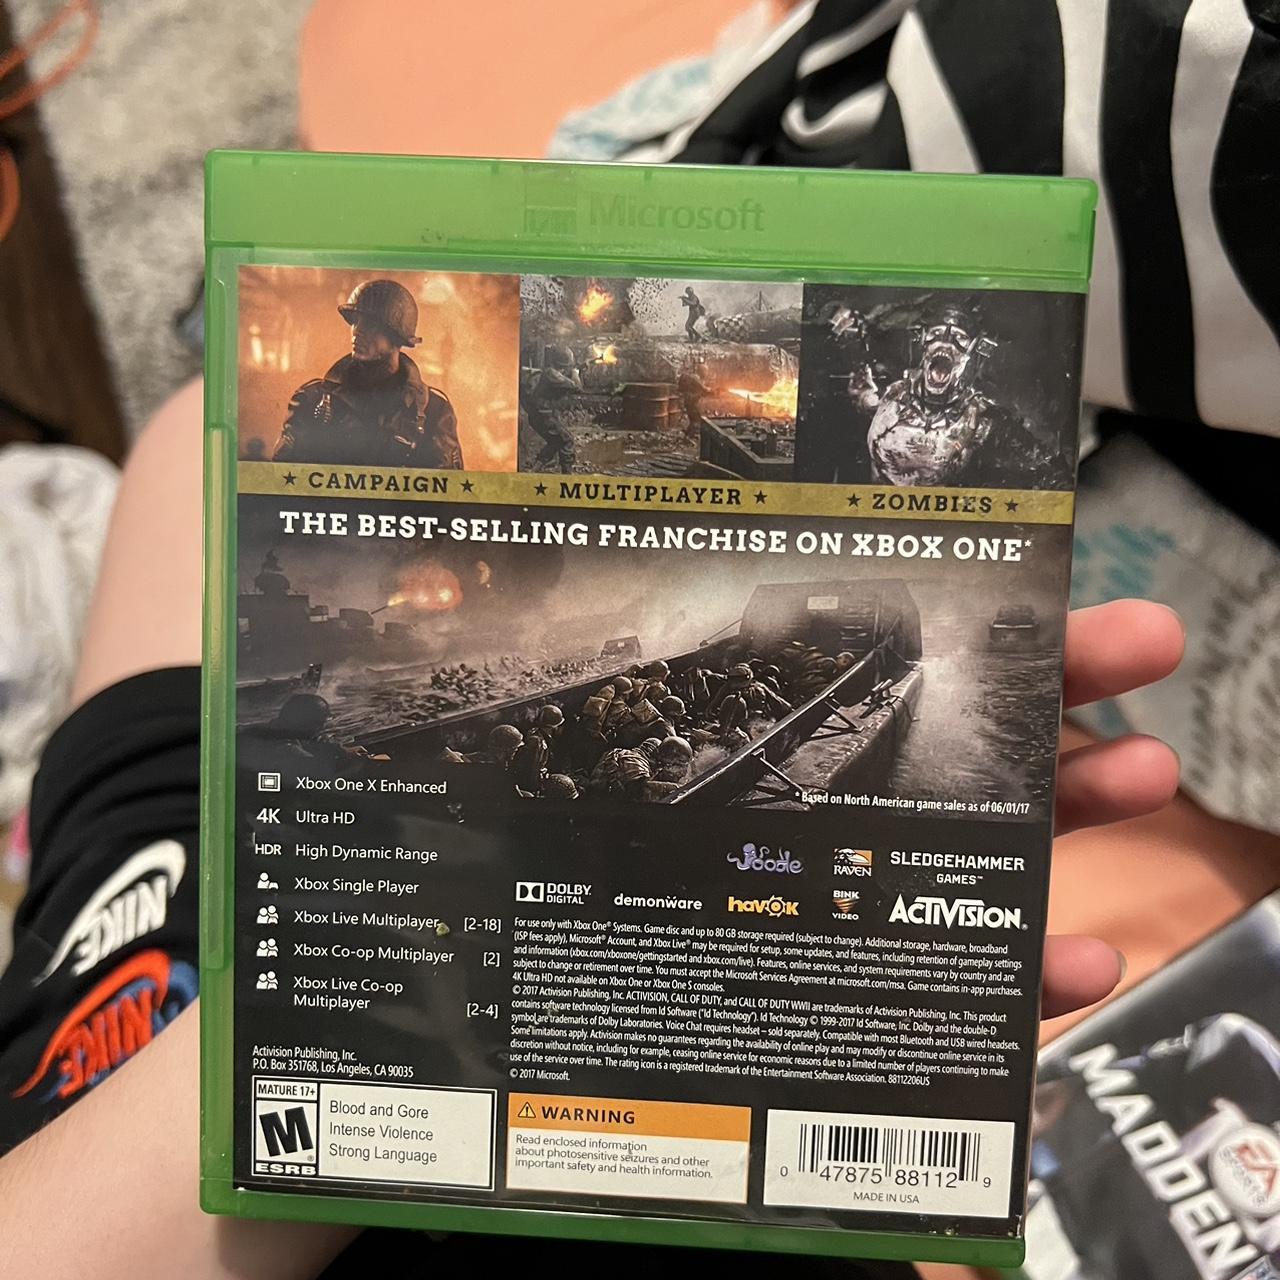 Call of Duty WWII Game for the XBOX ONE fun & - Depop